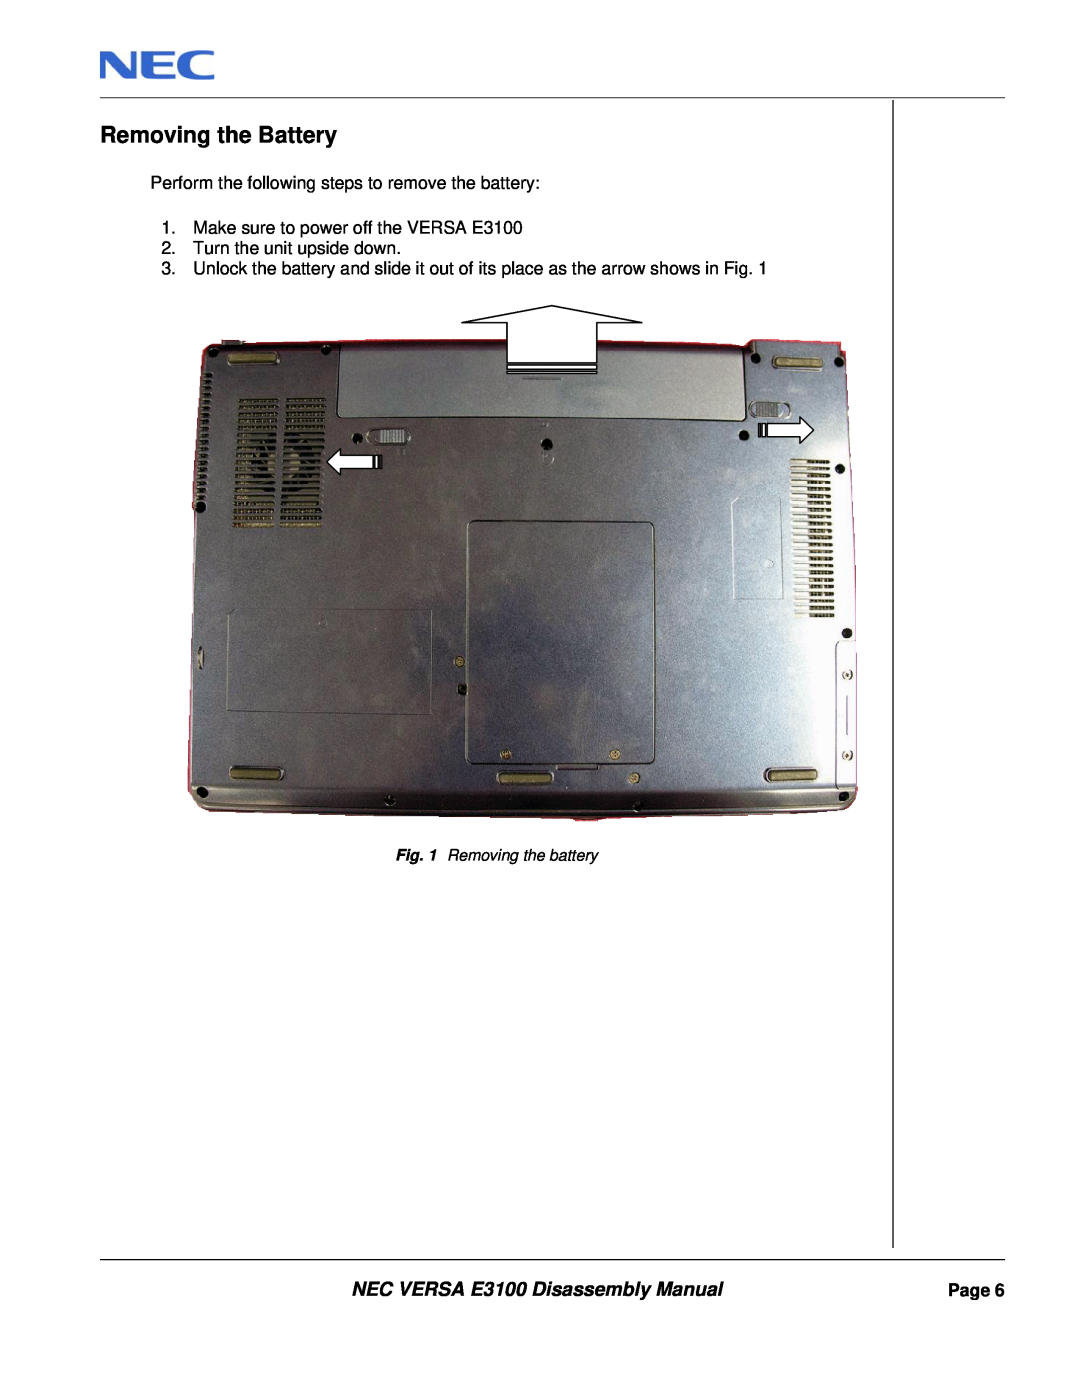 NEC Removing the Battery, NEC VERSA E3100 Disassembly Manual, Perform the following steps to remove the battery, Page 